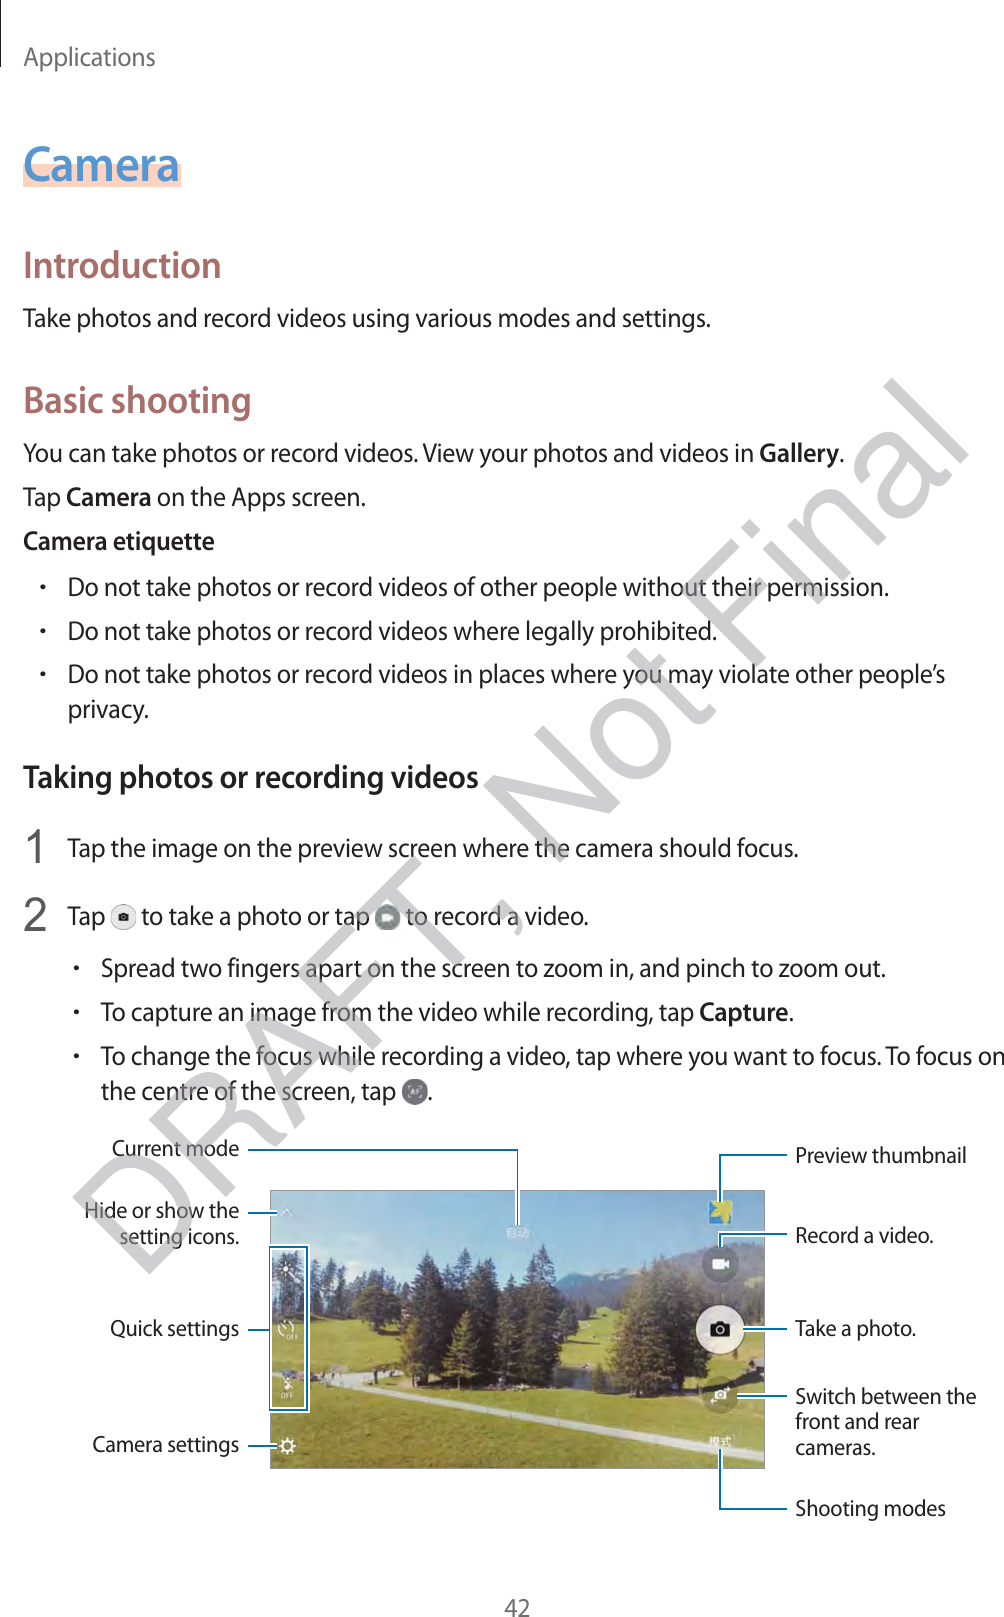 Applications42CameraIntroductionTake photos and record videos using various modes and settings.Basic shootingYou can take photos or record videos. View your photos and videos in Gallery.Tap Camera on the Apps screen.Camera etiquetterDo not take photos or record videos of other people without their permission.rDo not take photos or record videos where legally prohibited.rDo not take photos or record videos in places where you may violate other people’s privacy.Taking photos or recording videos1 Tap the image on the preview screen where the camera should focus.2 Tap   to take a photo or tap   to record a video.rSpread two fingers apart on the screen to zoom in, and pinch to zoom out.rTo capture an image from the video while recording, tap Capture.rTo change the focus while recording a video, tap where you want to focus. To focus on the centre of the screen, tap  .Camera settingsHide or show the setting icons.Quick settingsRecord a video.Take a photo.Switch between the front and rear cameras.Shooting modesPreview thumbnailCurrent modeDRAFT, Not Final